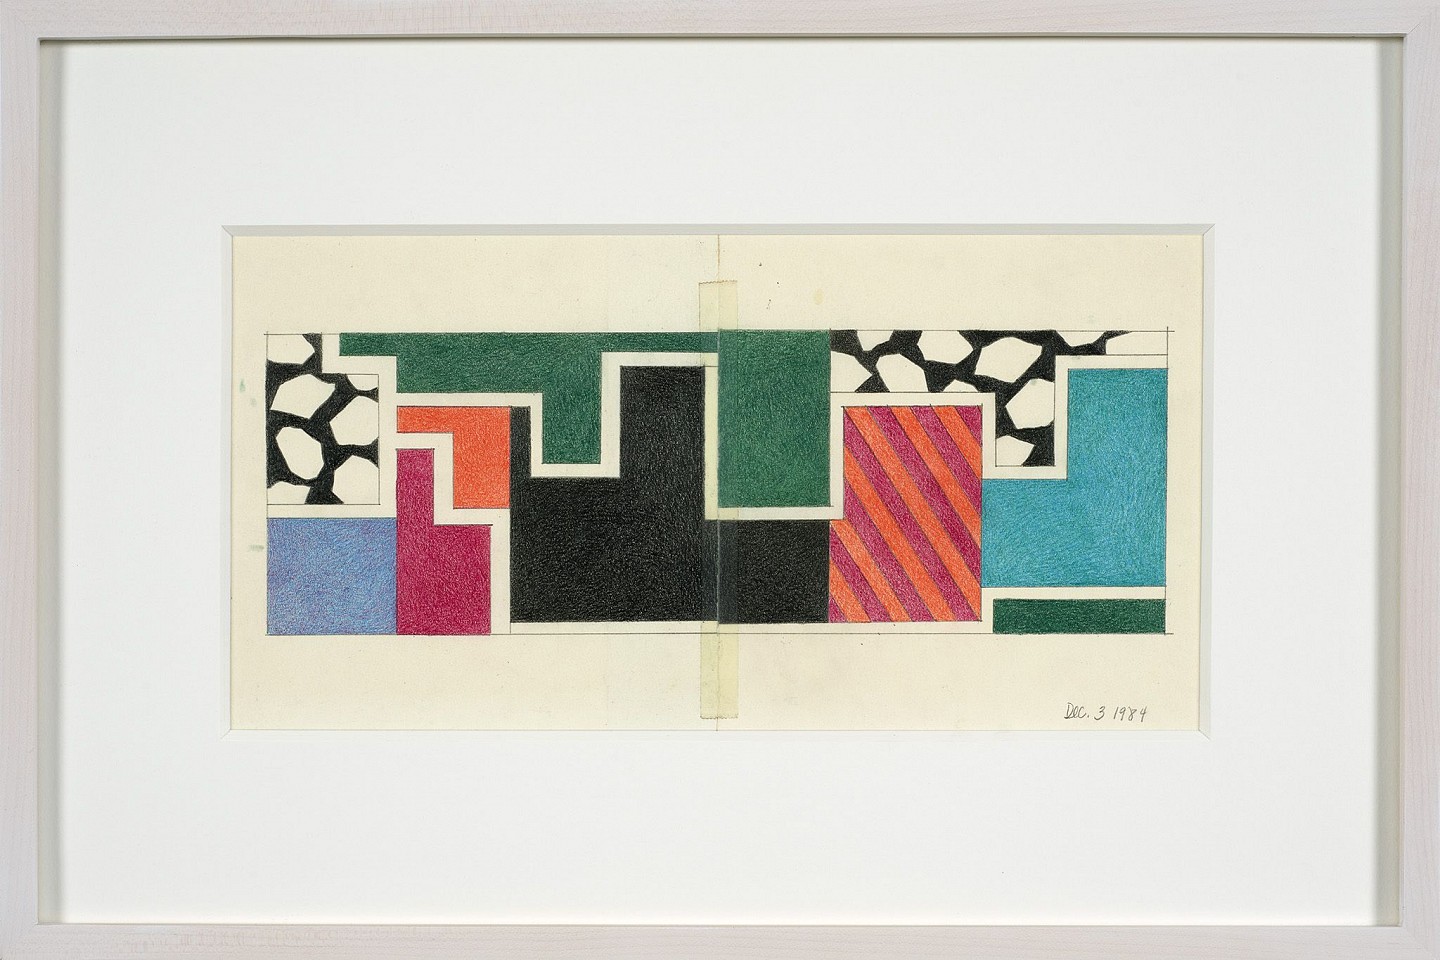 Mary Dill Henry, Untitled (December 3), 1984
Prismacolor and graphite on paper, 7 3/4 x 14 in. (19.7 x 35.6 cm)
MHEN-00174